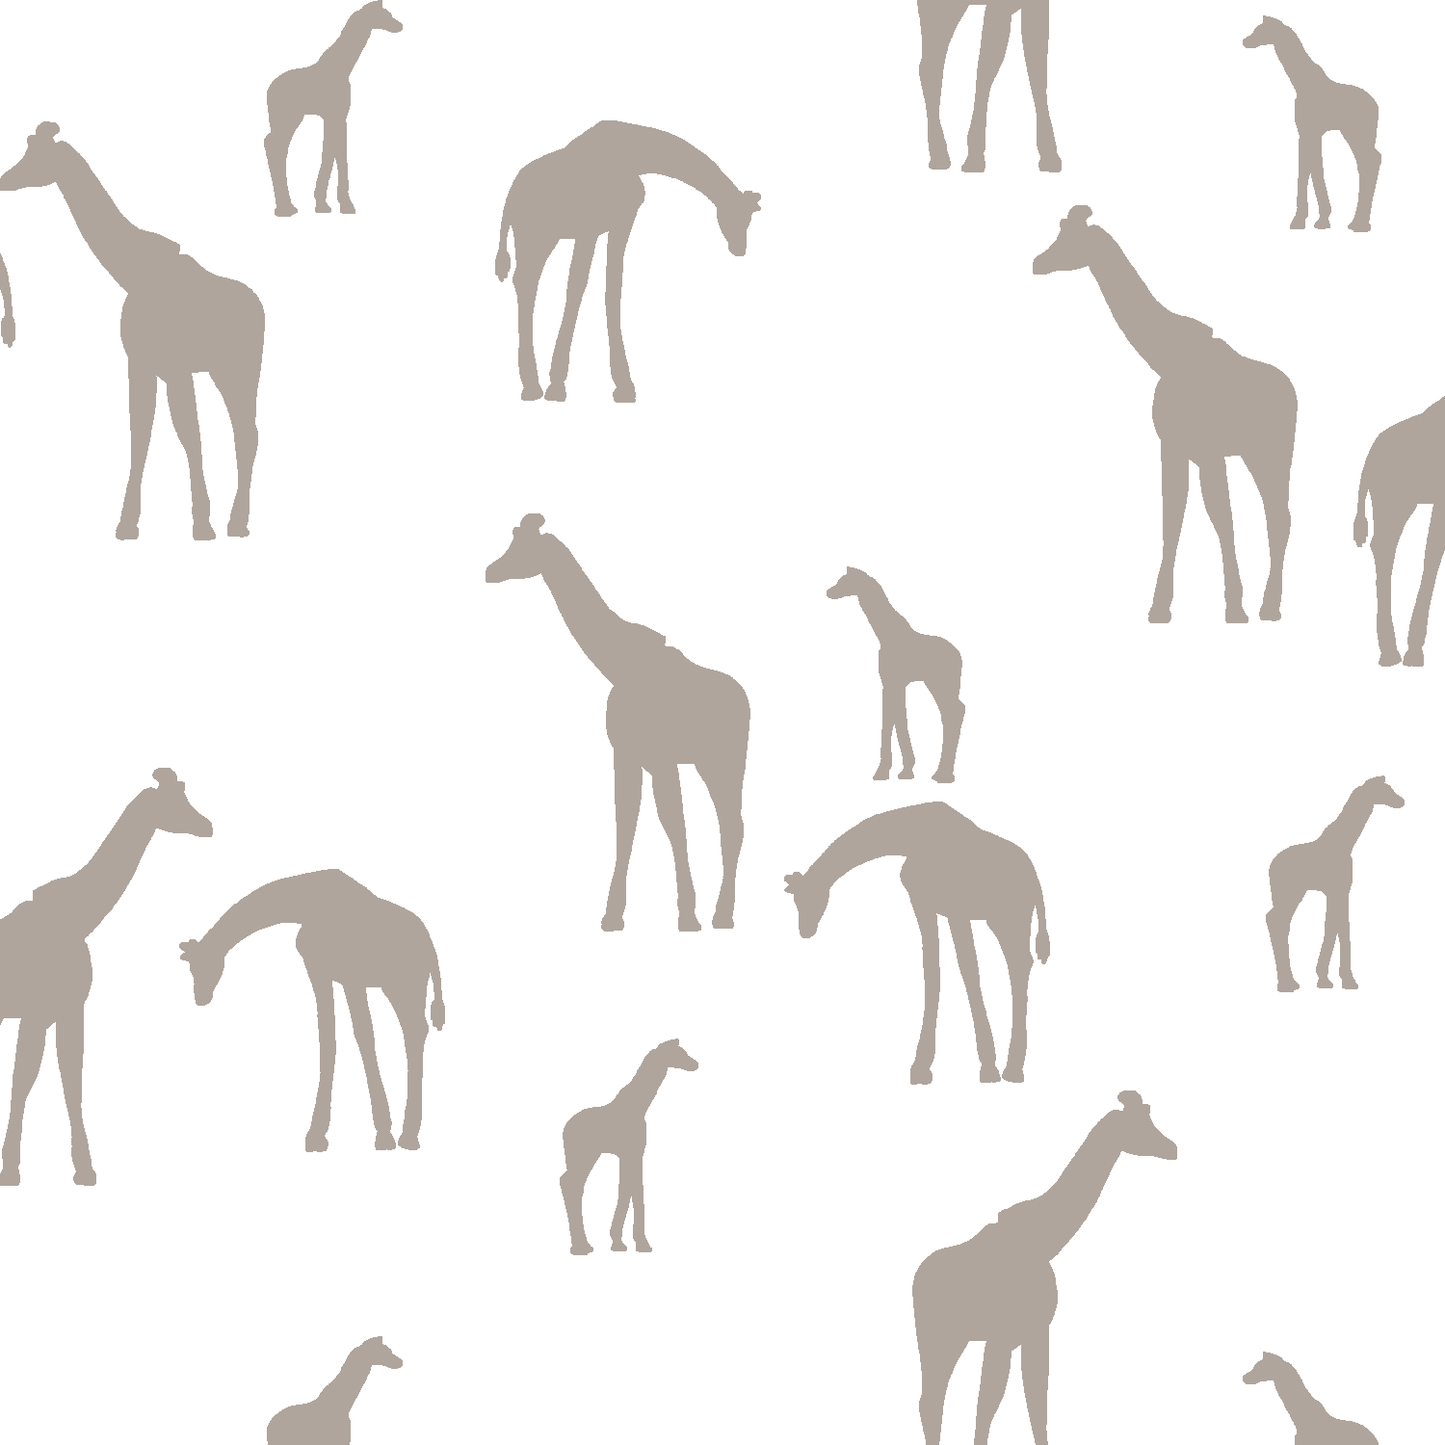 Giraffe Silhouette in Taupe on White